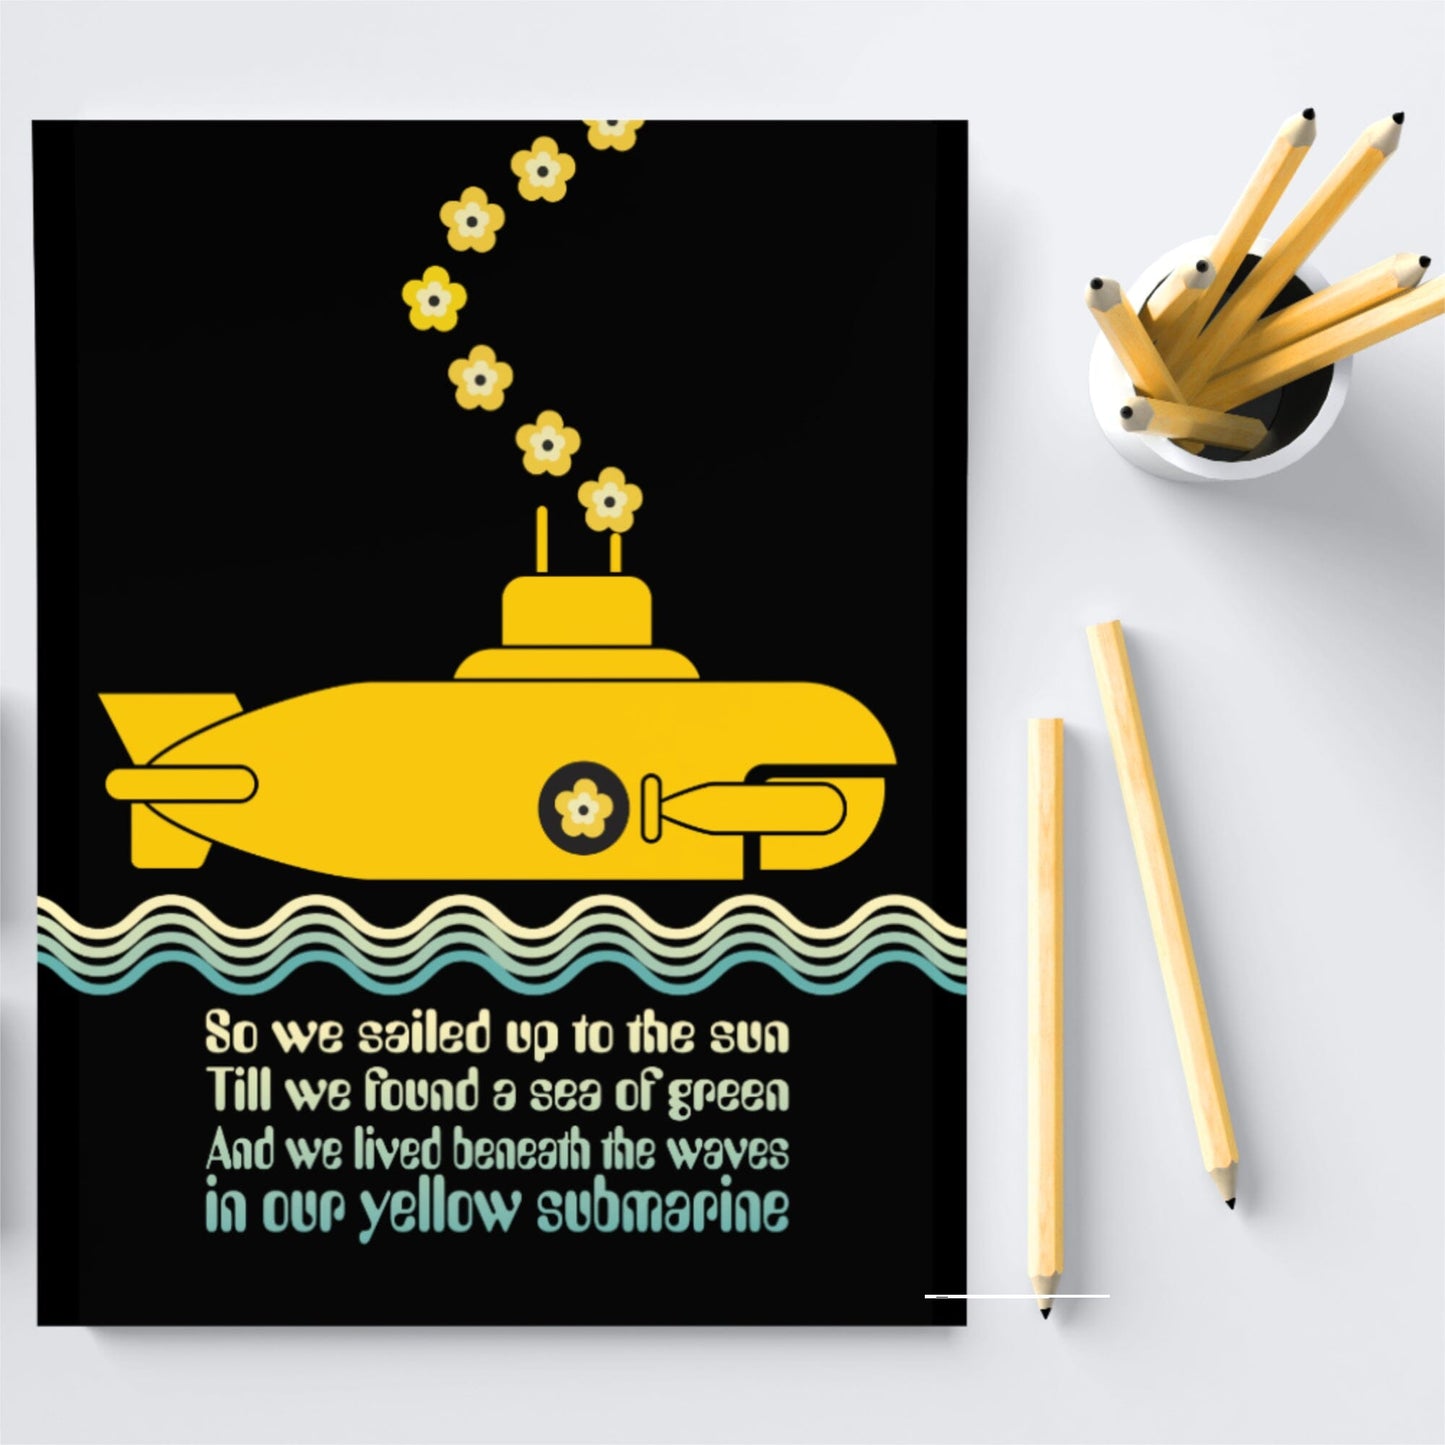 Yellow Submarine by the Beatles - Print Song Lyric Music Art Song Lyrics Art Song Lyrics Art 8x10 Unframed Print 